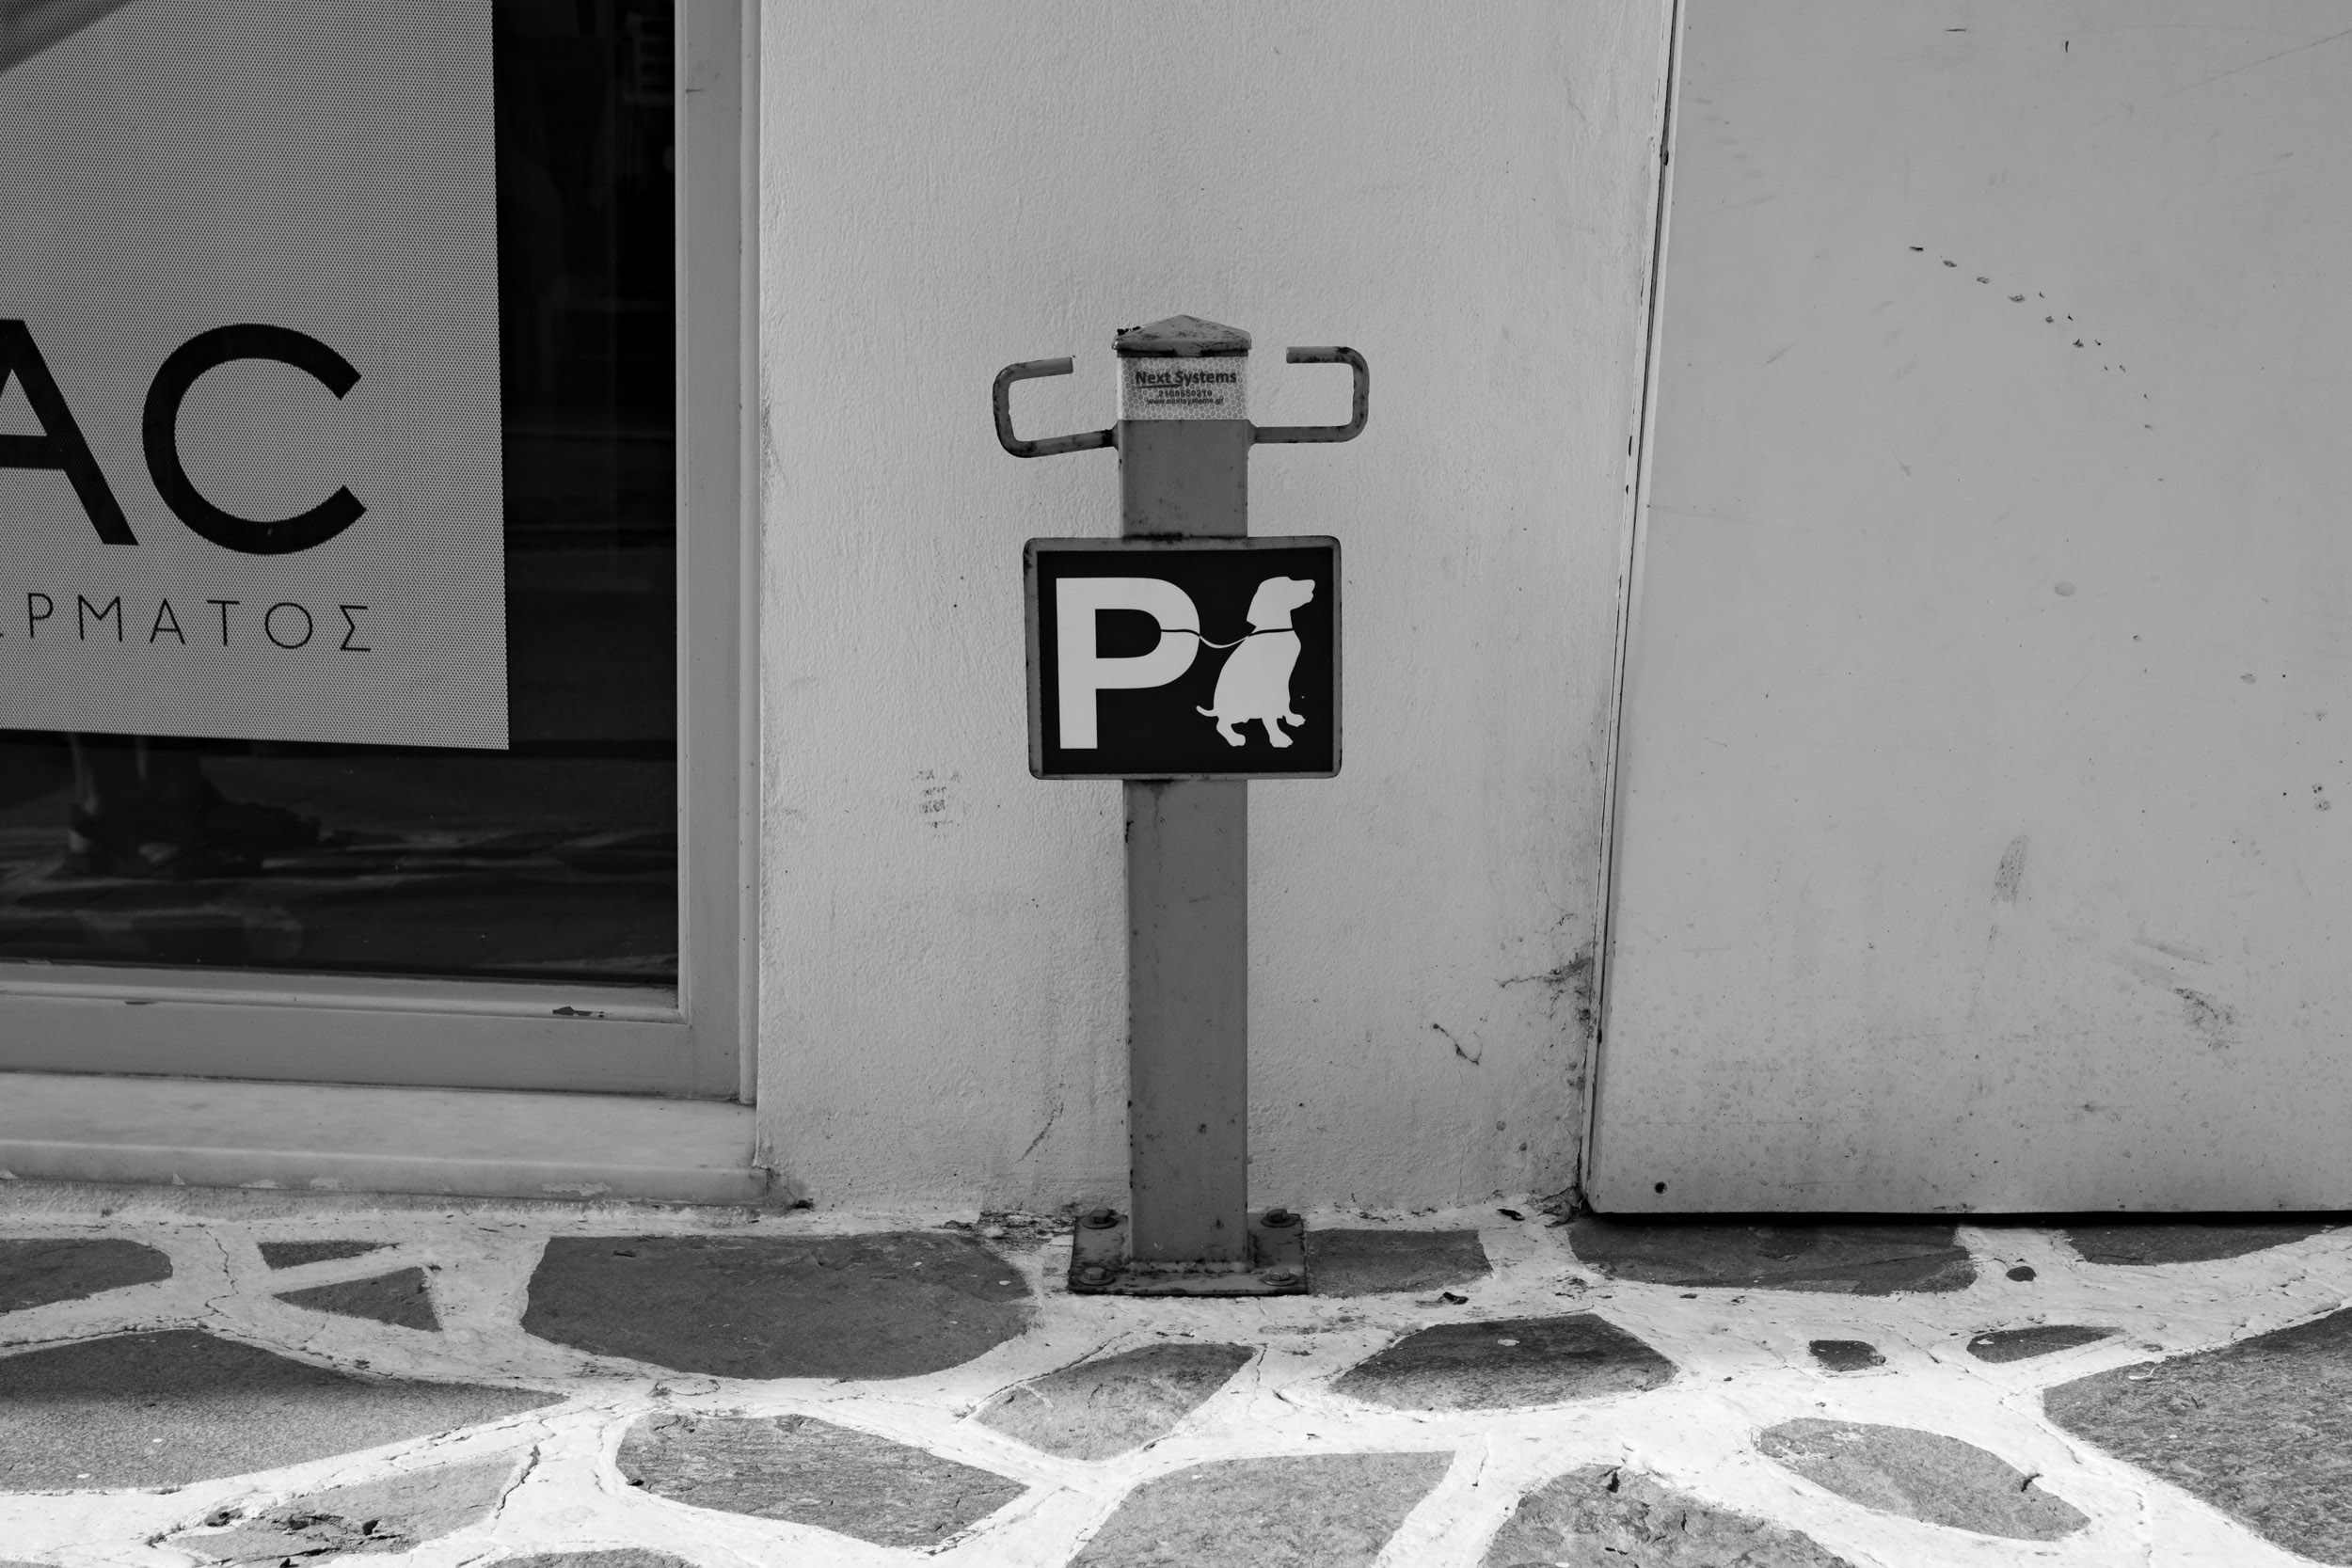 A sign for the "Dog Parking" spot in front of a shop in Naxos, Greece.